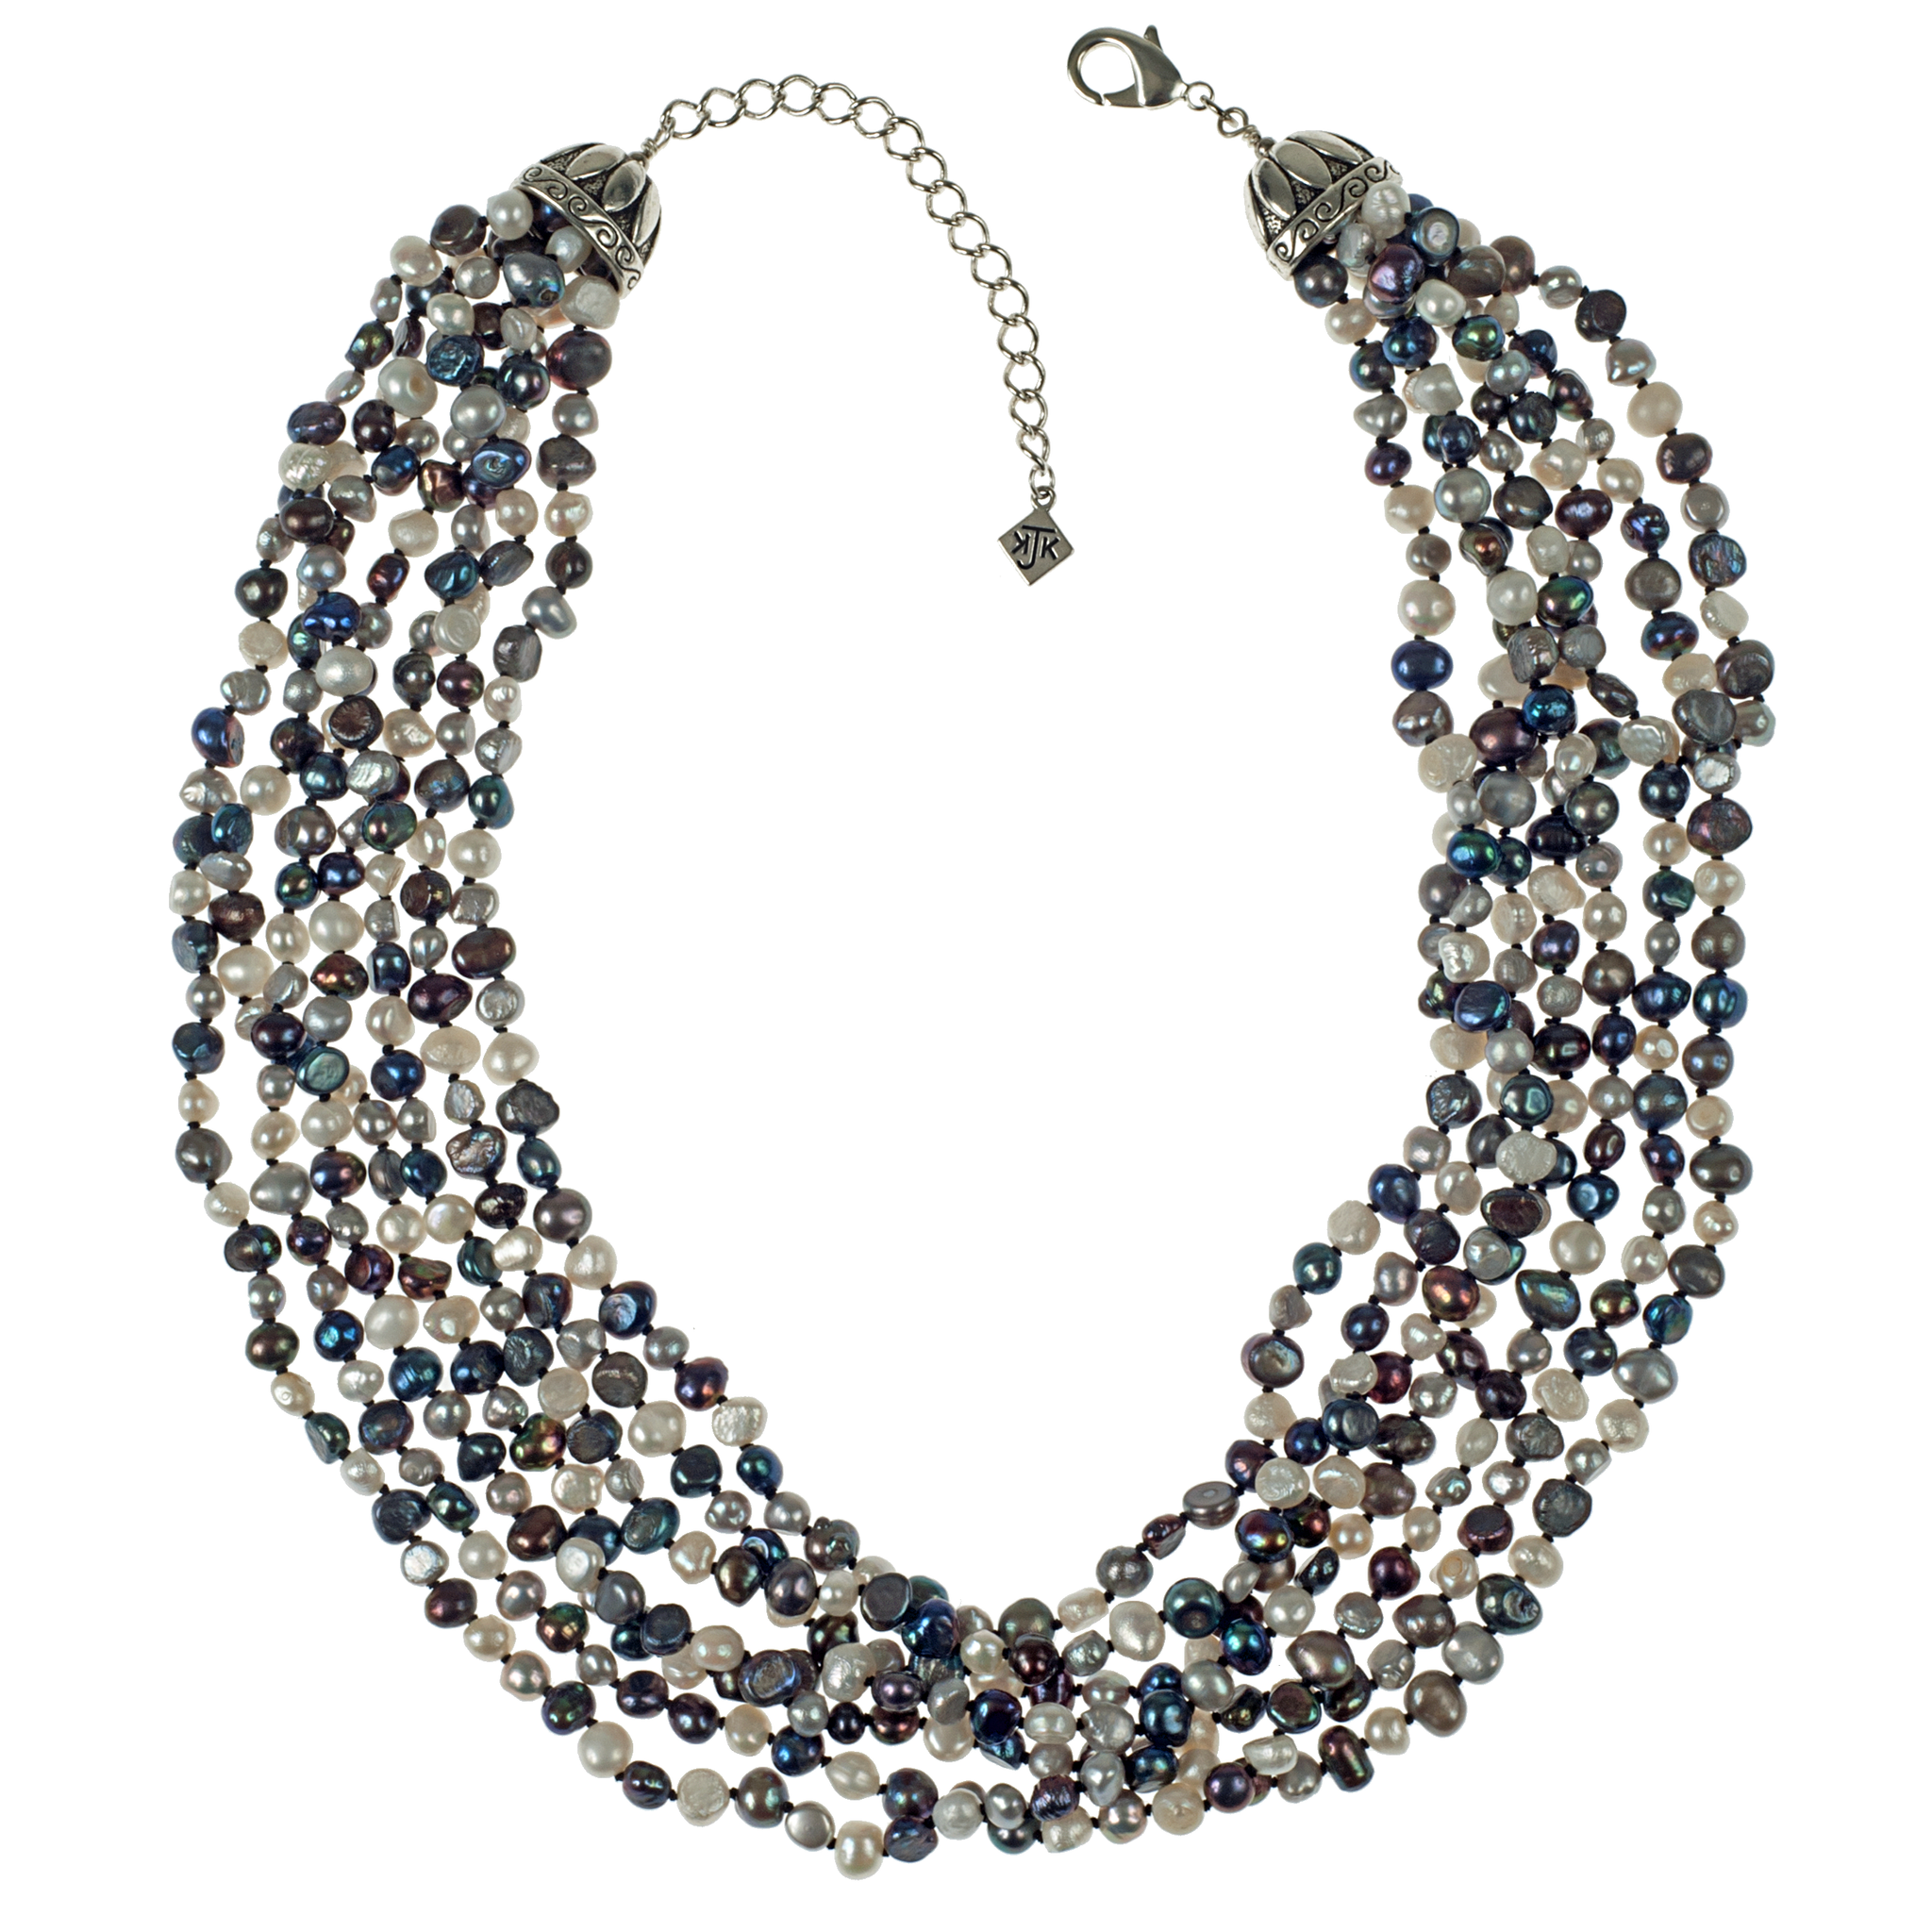 Seven Strand Cultured Pearl Necklace - KJKStyle